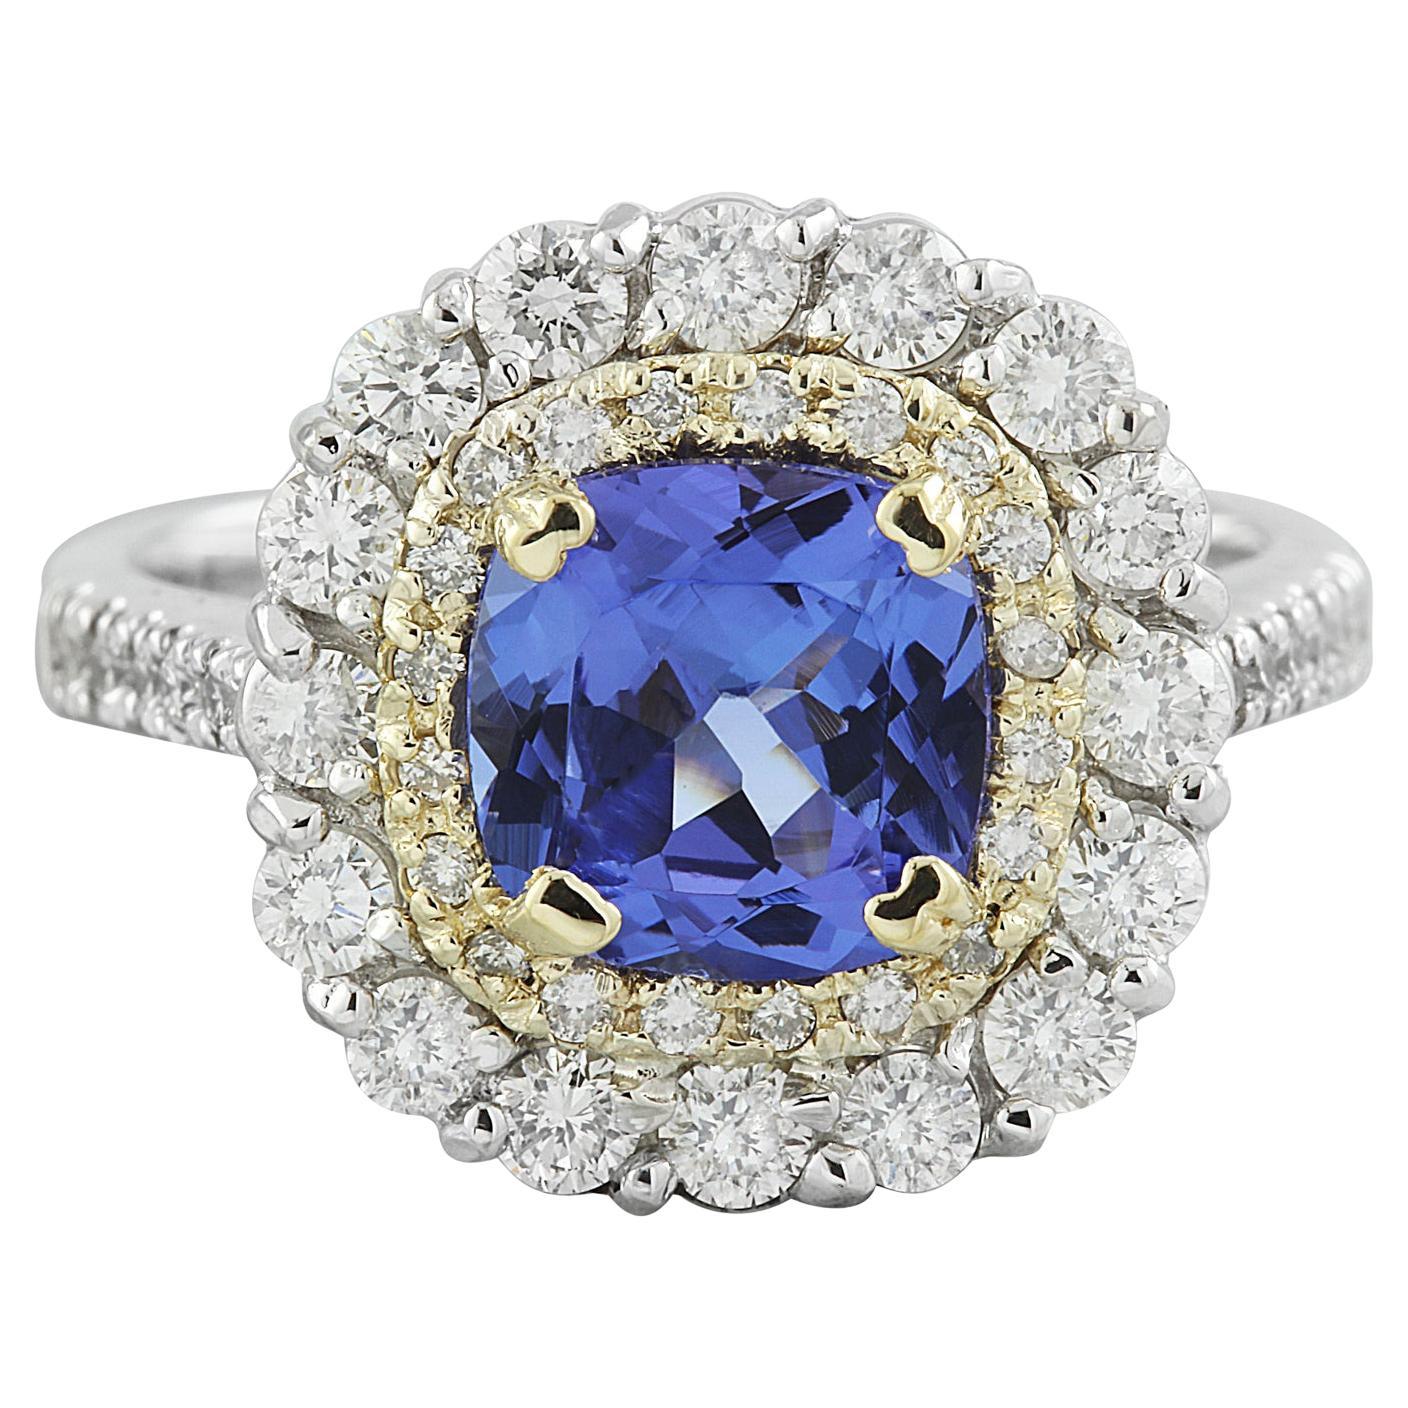 Exquisite Natural Tanzanite Diamond Ring in 14K Two-Tone Gold For Sale